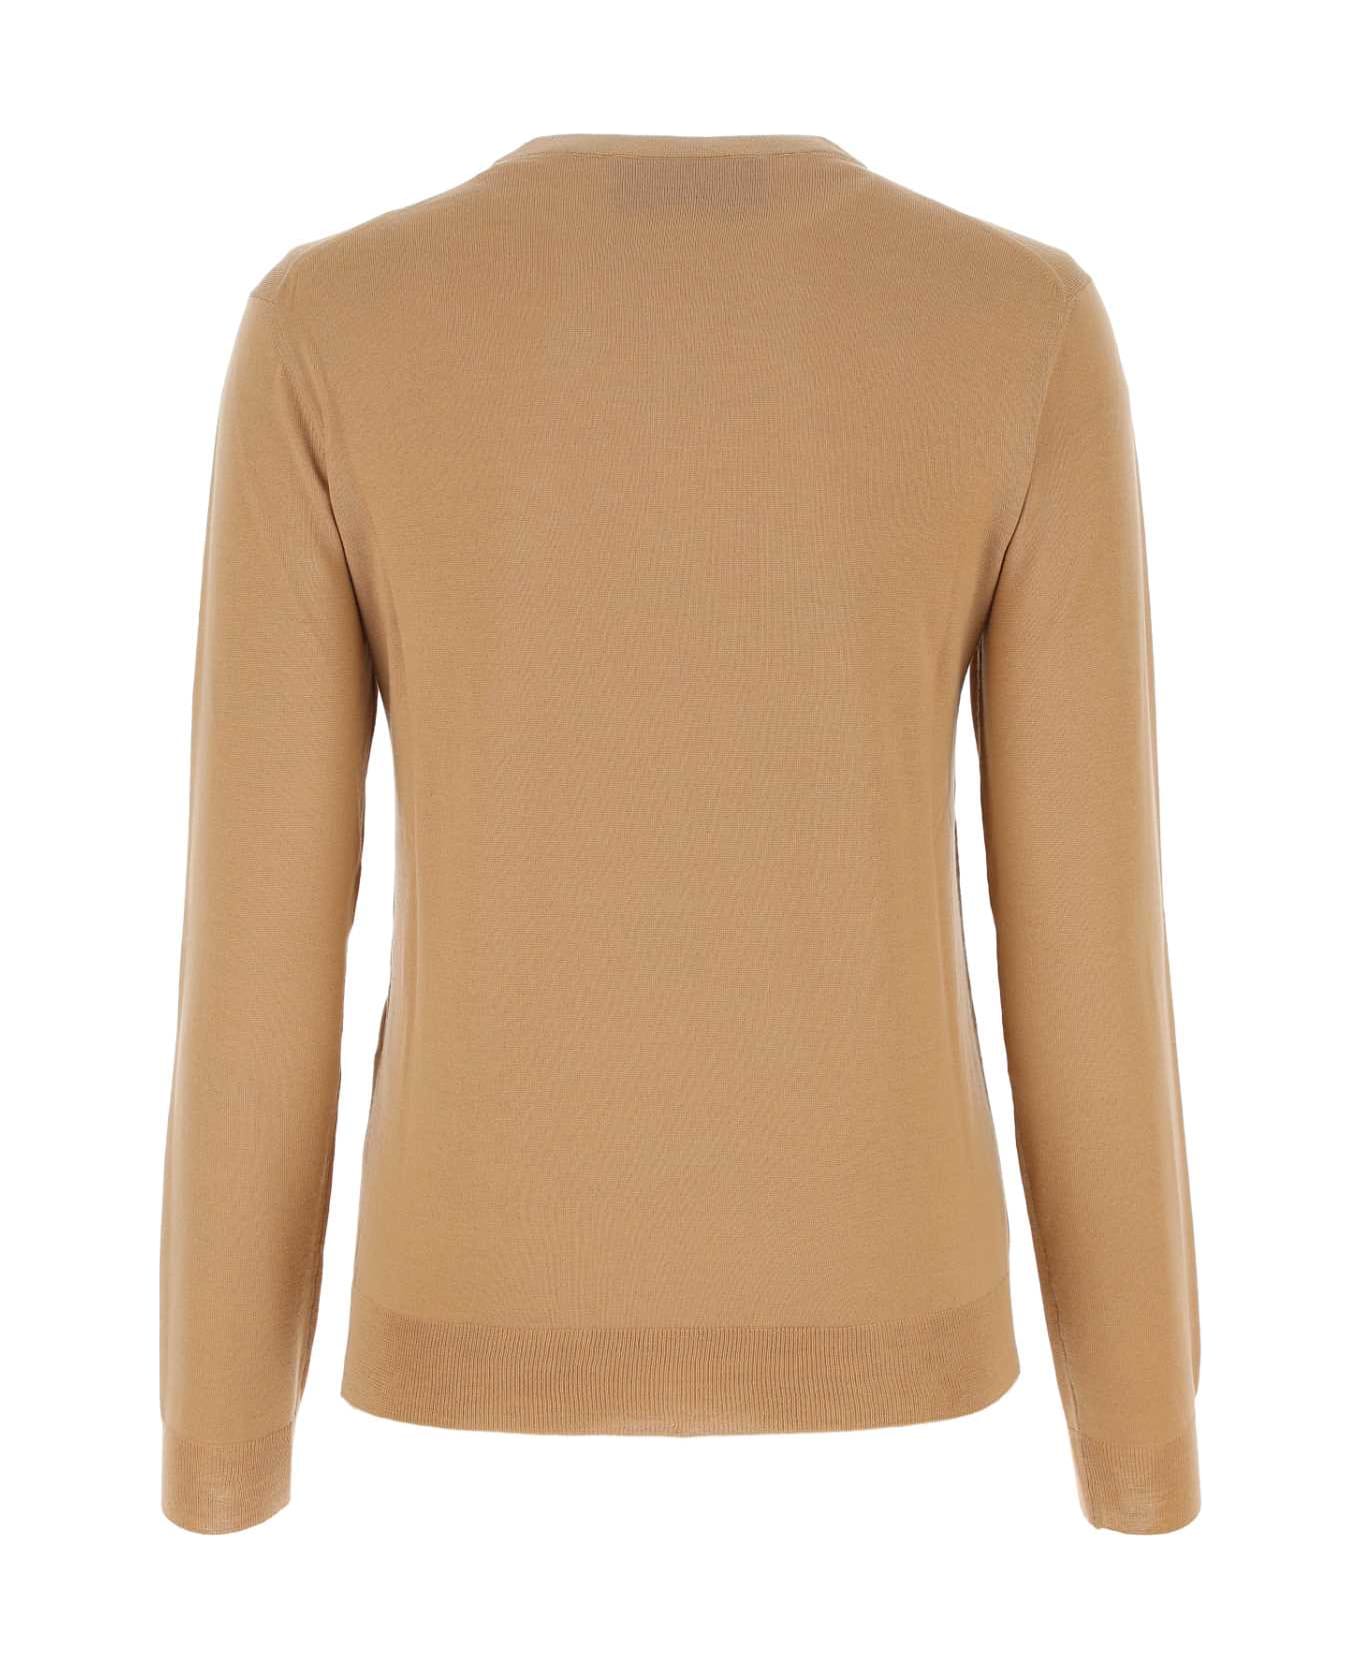 Gucci Camel Wool Sweater - Brown